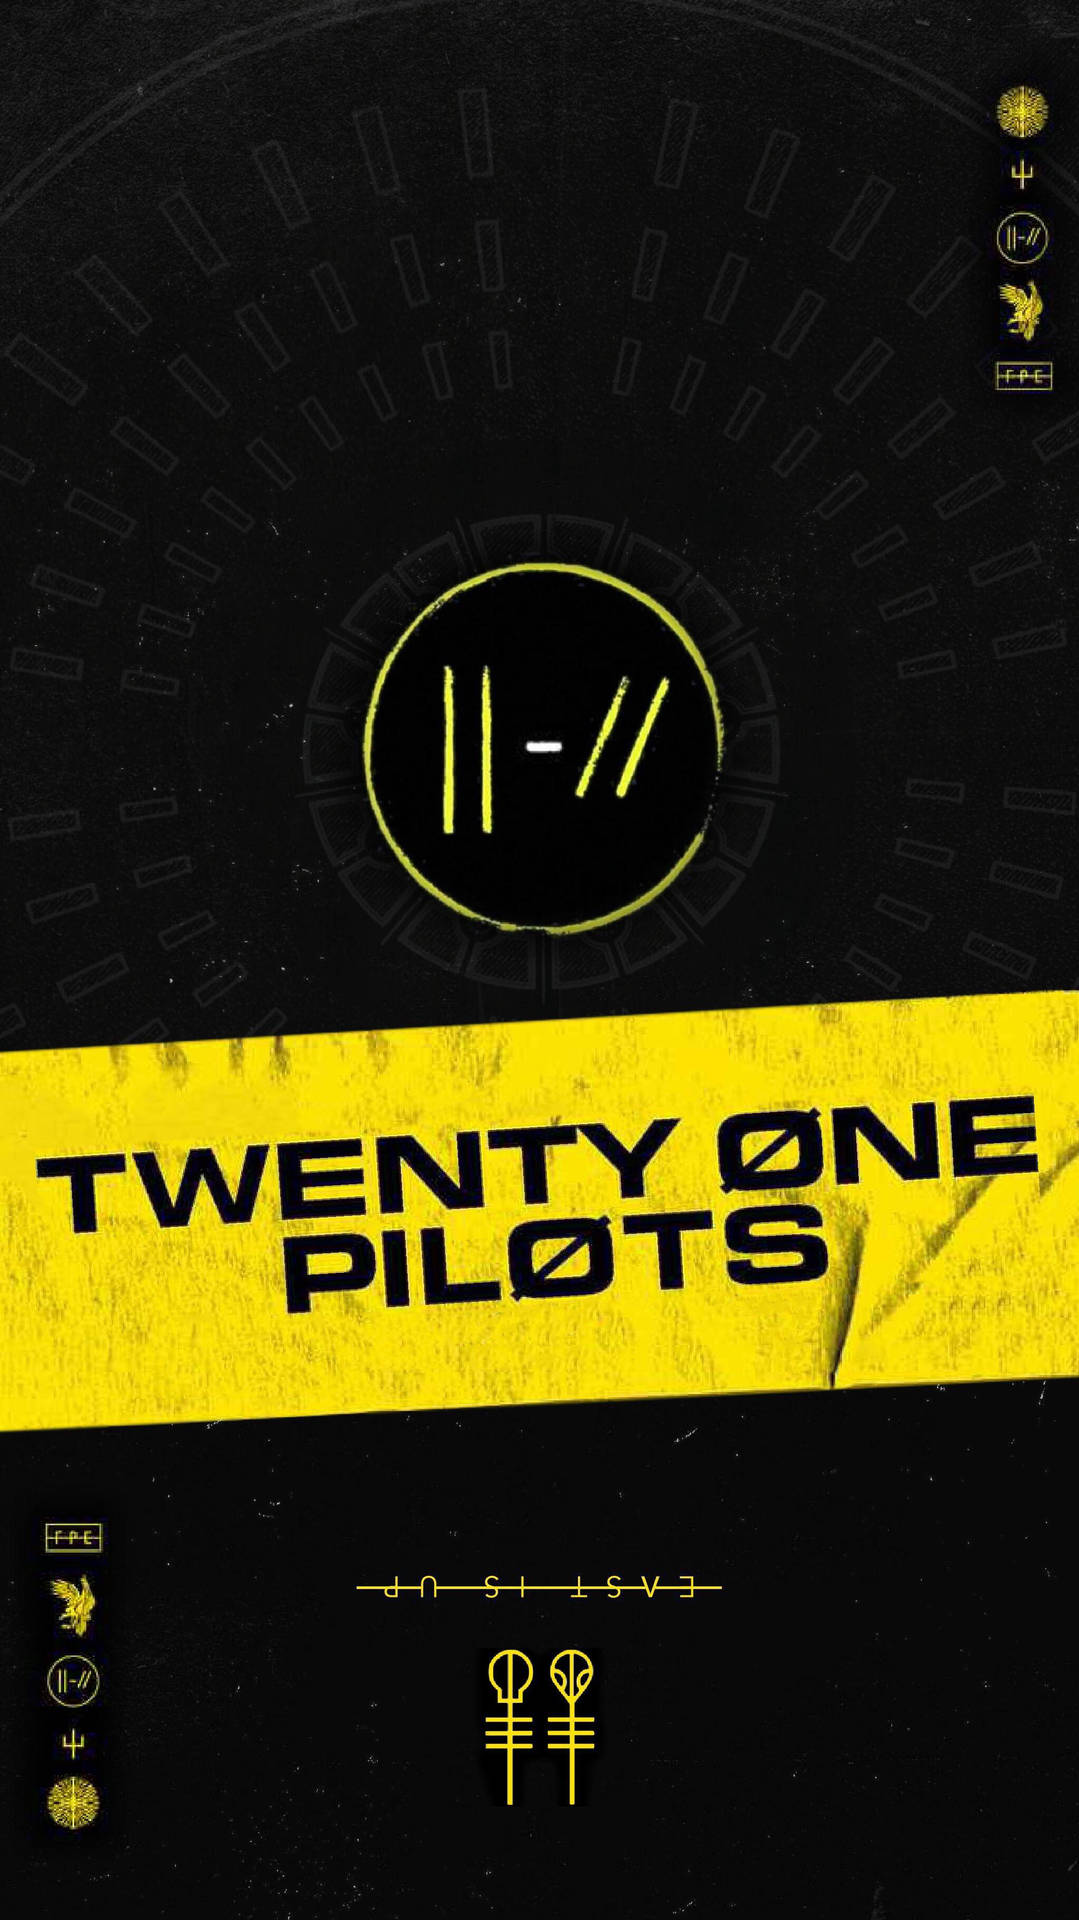 Experience the incredibly unique sounds of Twenty One Pilots on their latest album Trench. Wallpaper